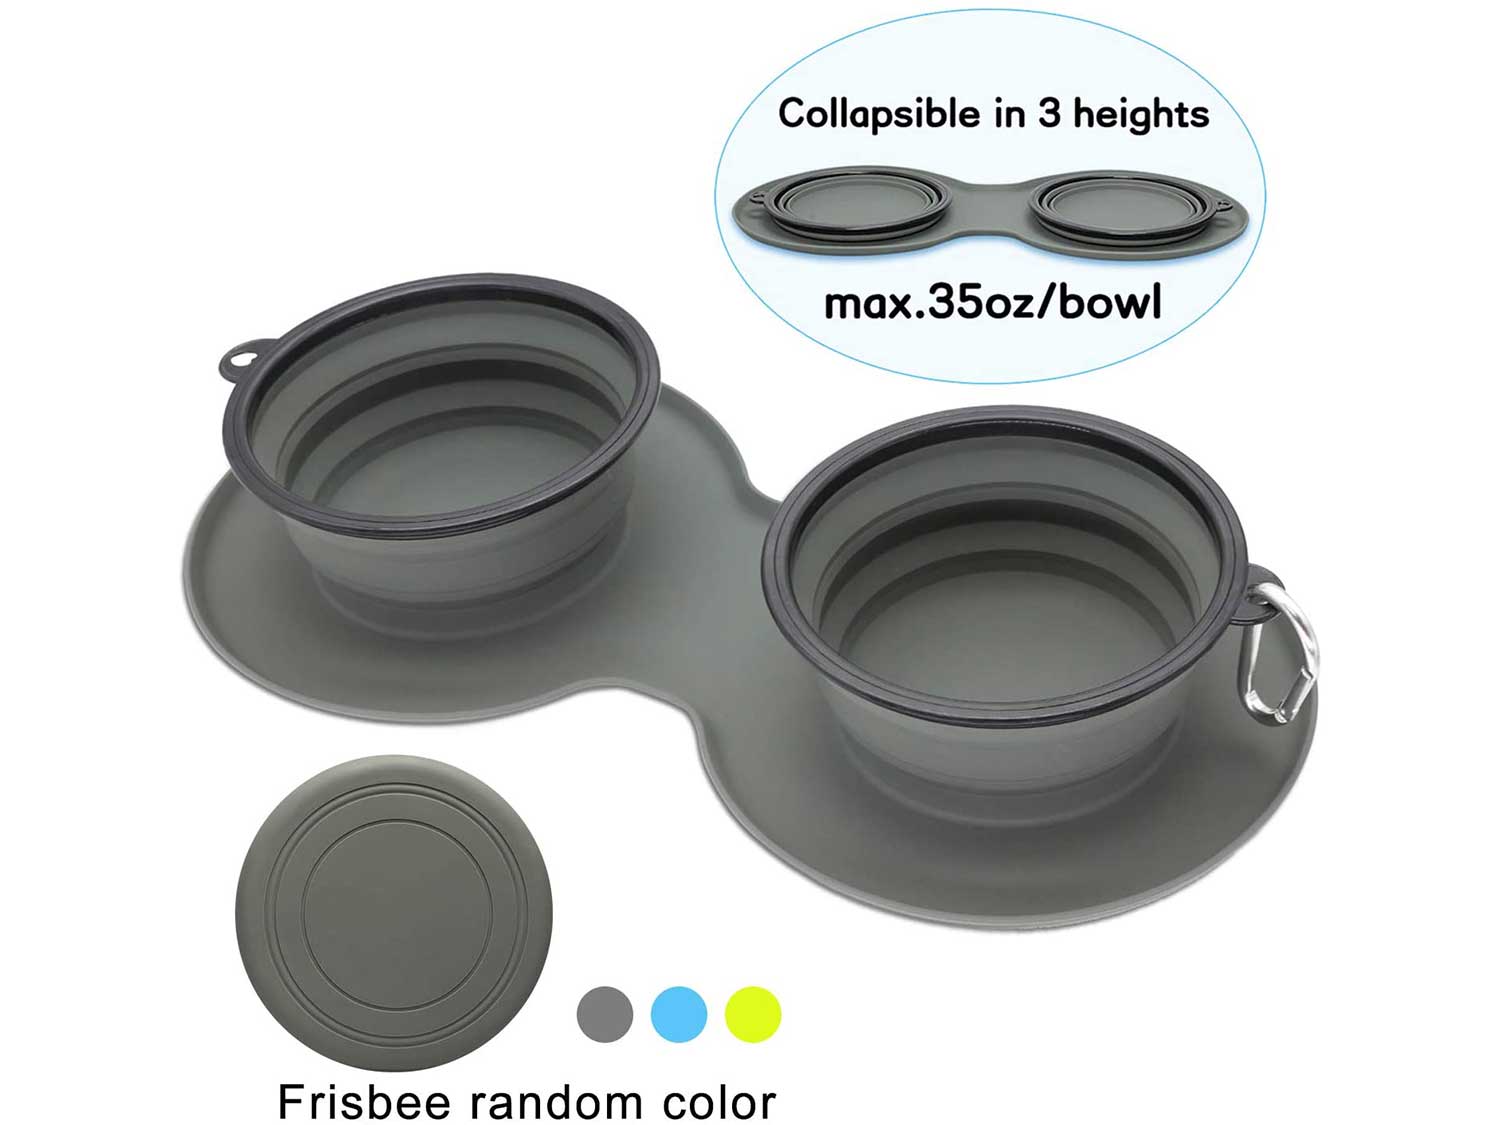 WINSEE Collapsible Dog Bowls with Mat, Portable Foldable Travel Dog Bowls, Expandable Cup Dish, No Spill Non-Skid Silicone Pet Food&Water Feeder Bowl with Free Frisbee& Carabiner, for Indoor, Outdoor